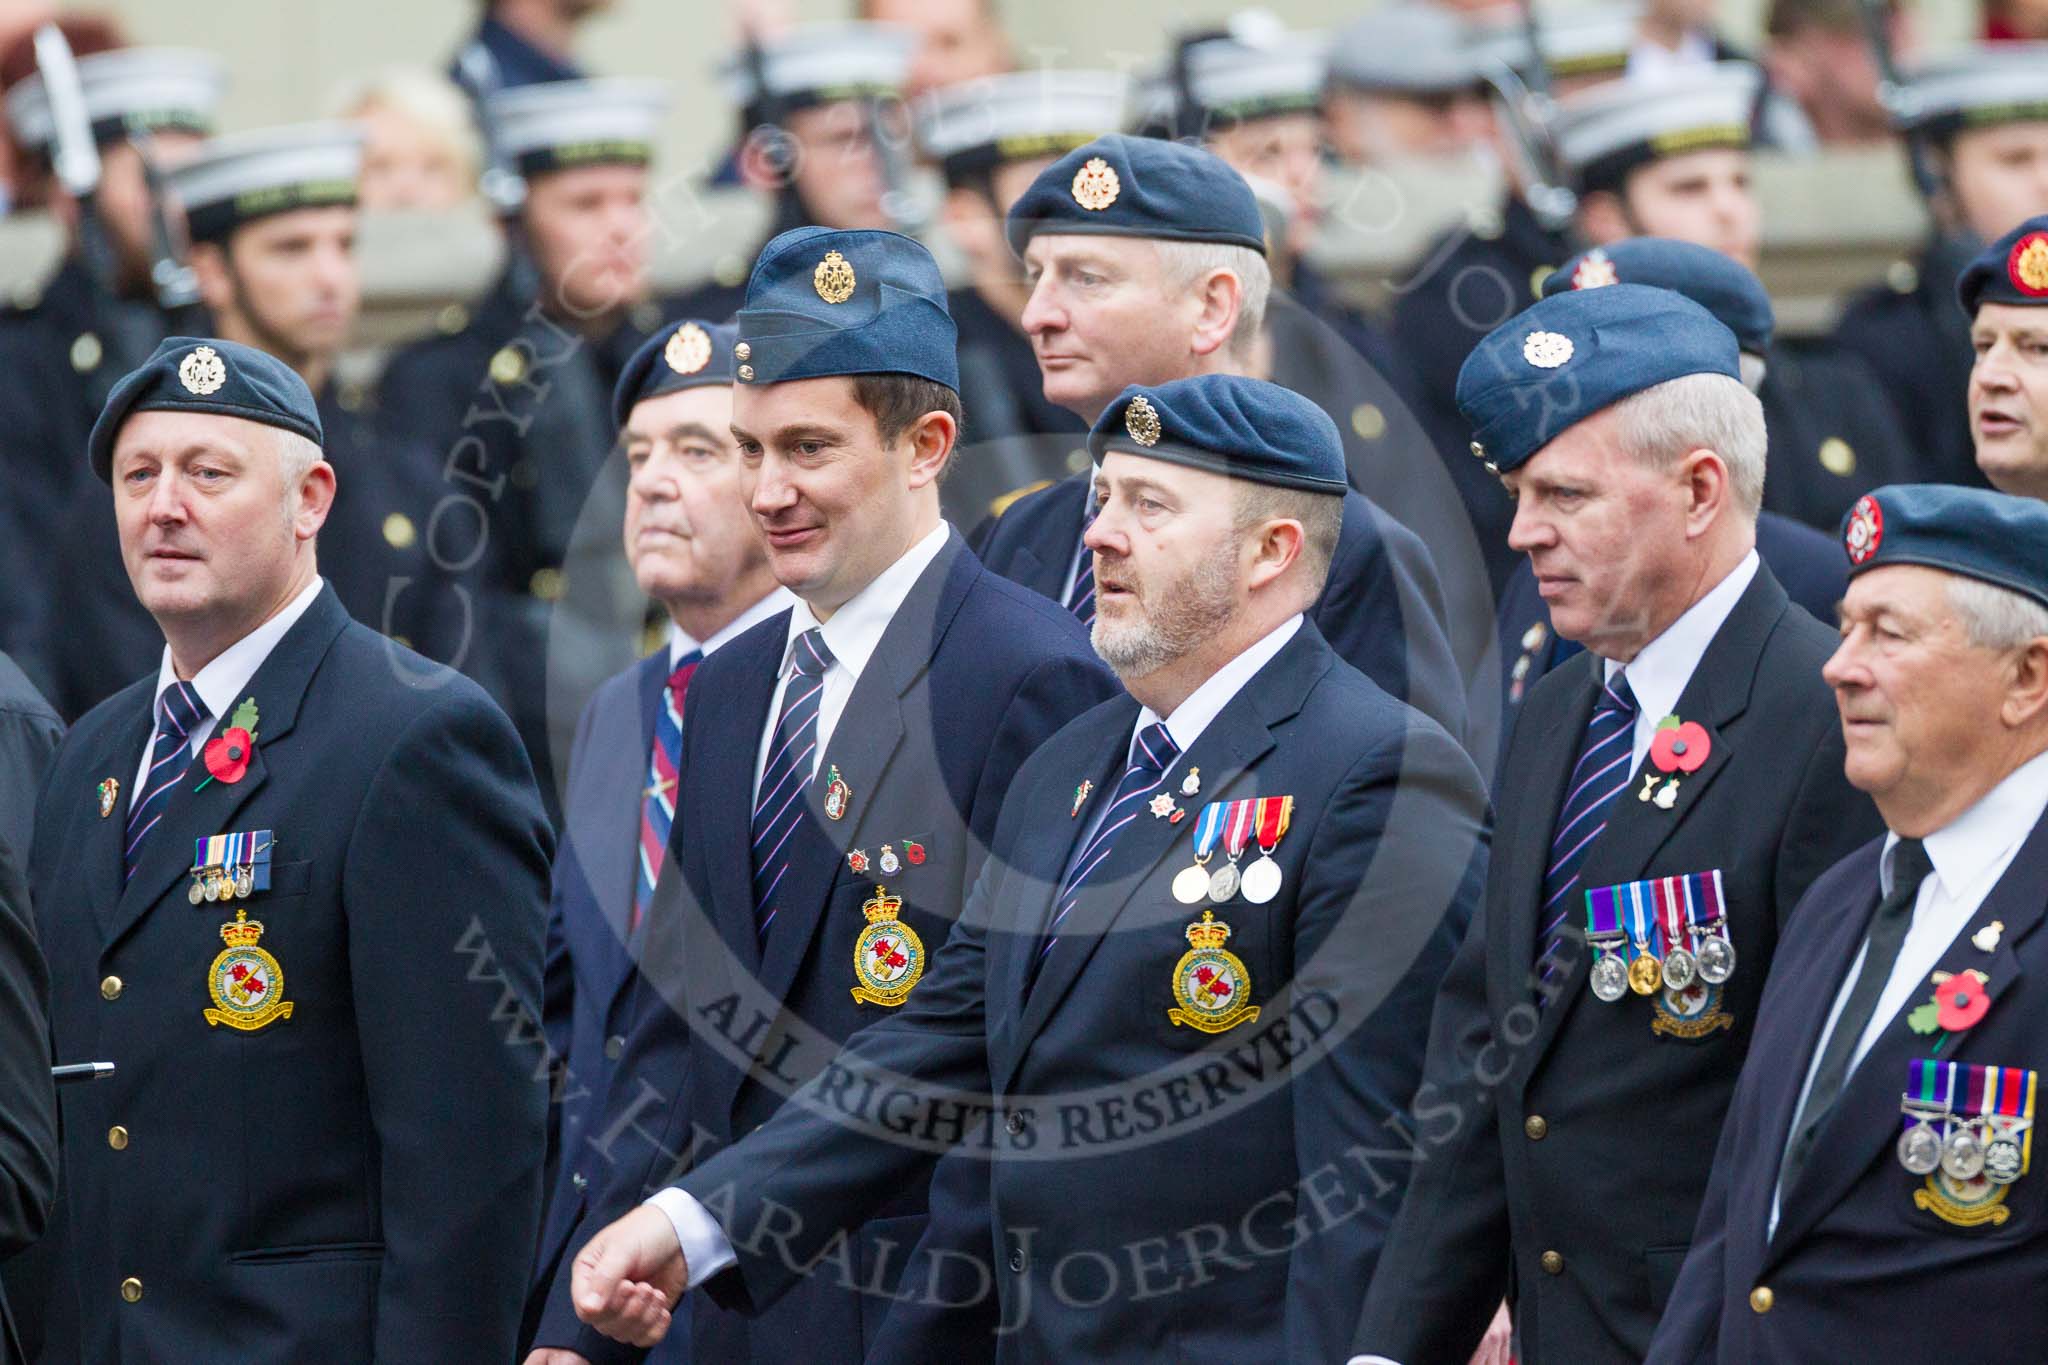 Remembrance Sunday at the Cenotaph 2015: Group C11, Royal Air Force & Defence Fire Services Association.
Cenotaph, Whitehall, London SW1,
London,
Greater London,
United Kingdom,
on 08 November 2015 at 11:48, image #483